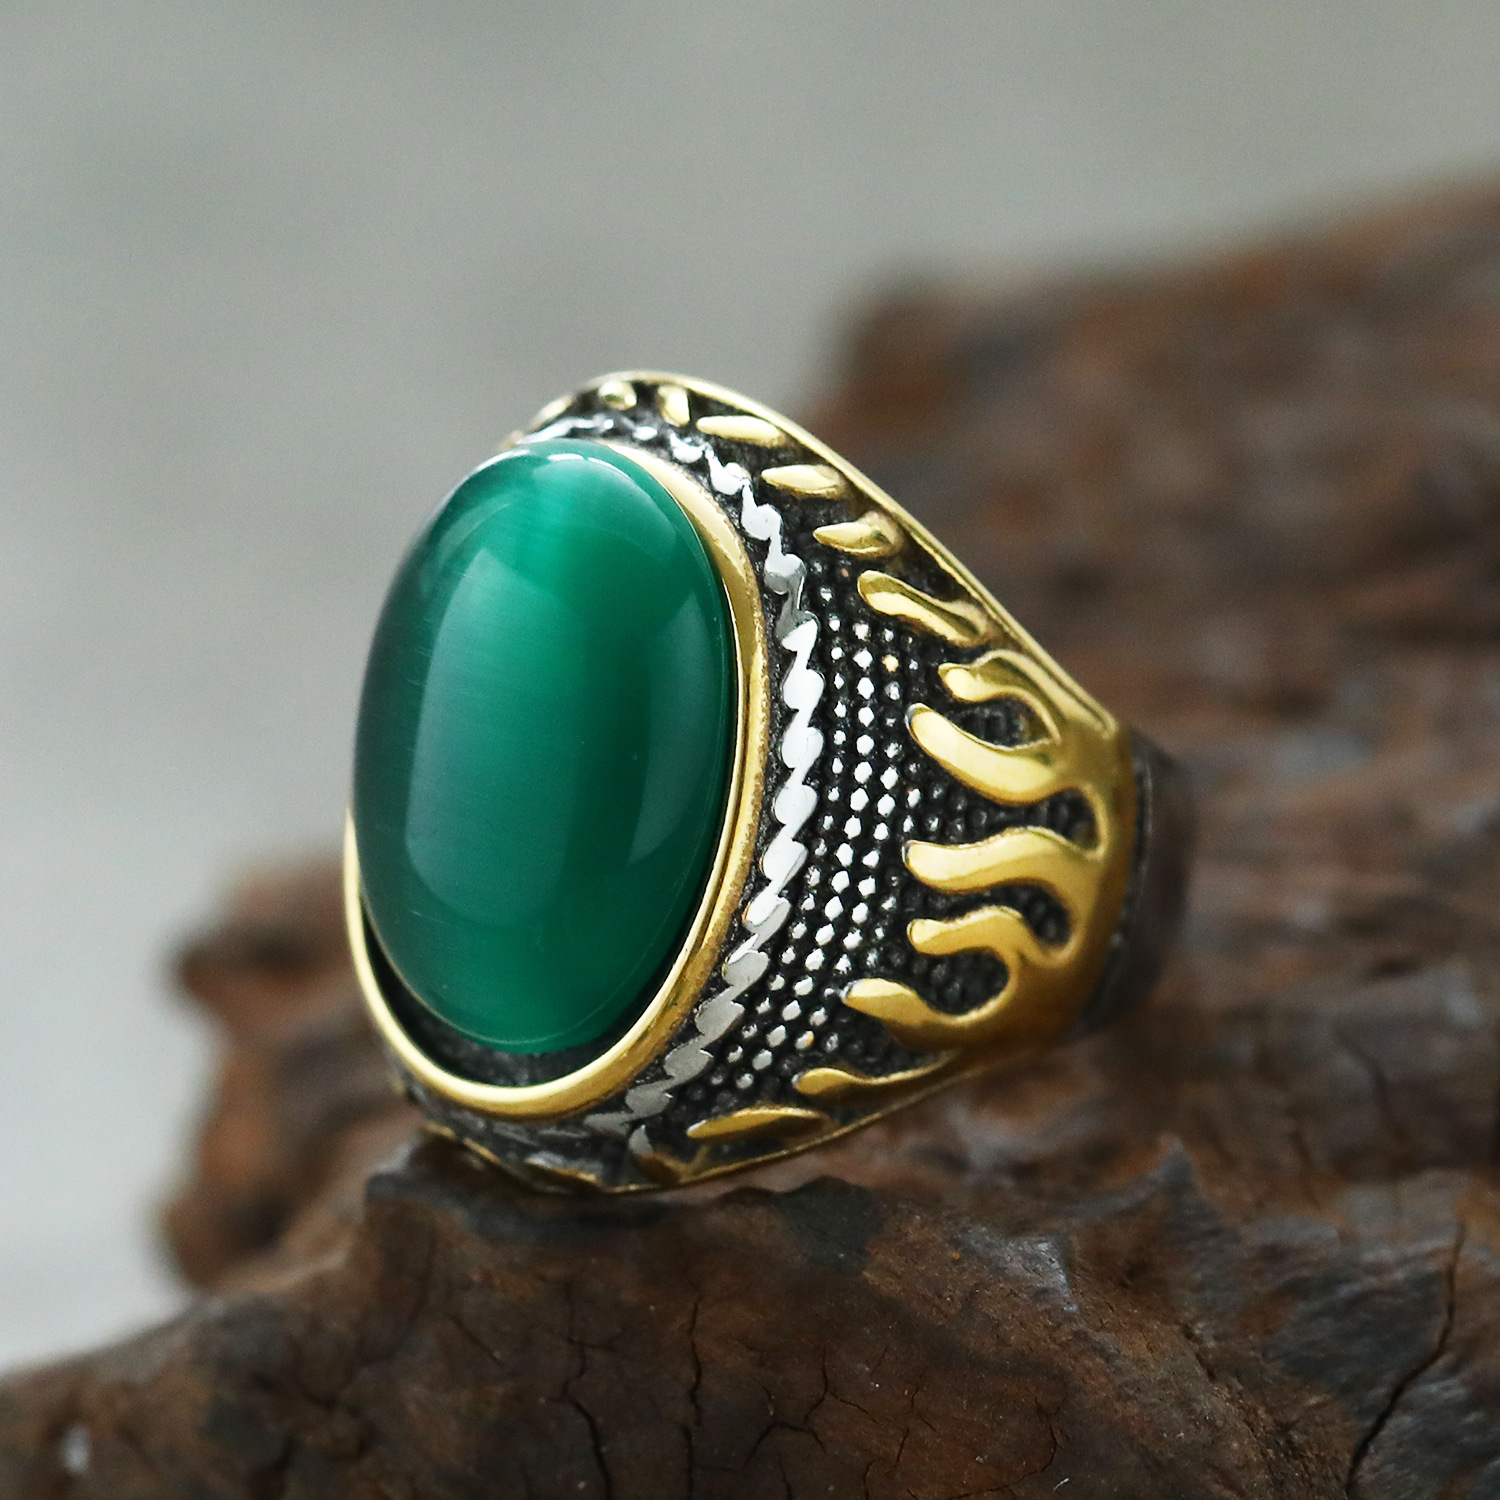 Steel and gold green turquoise